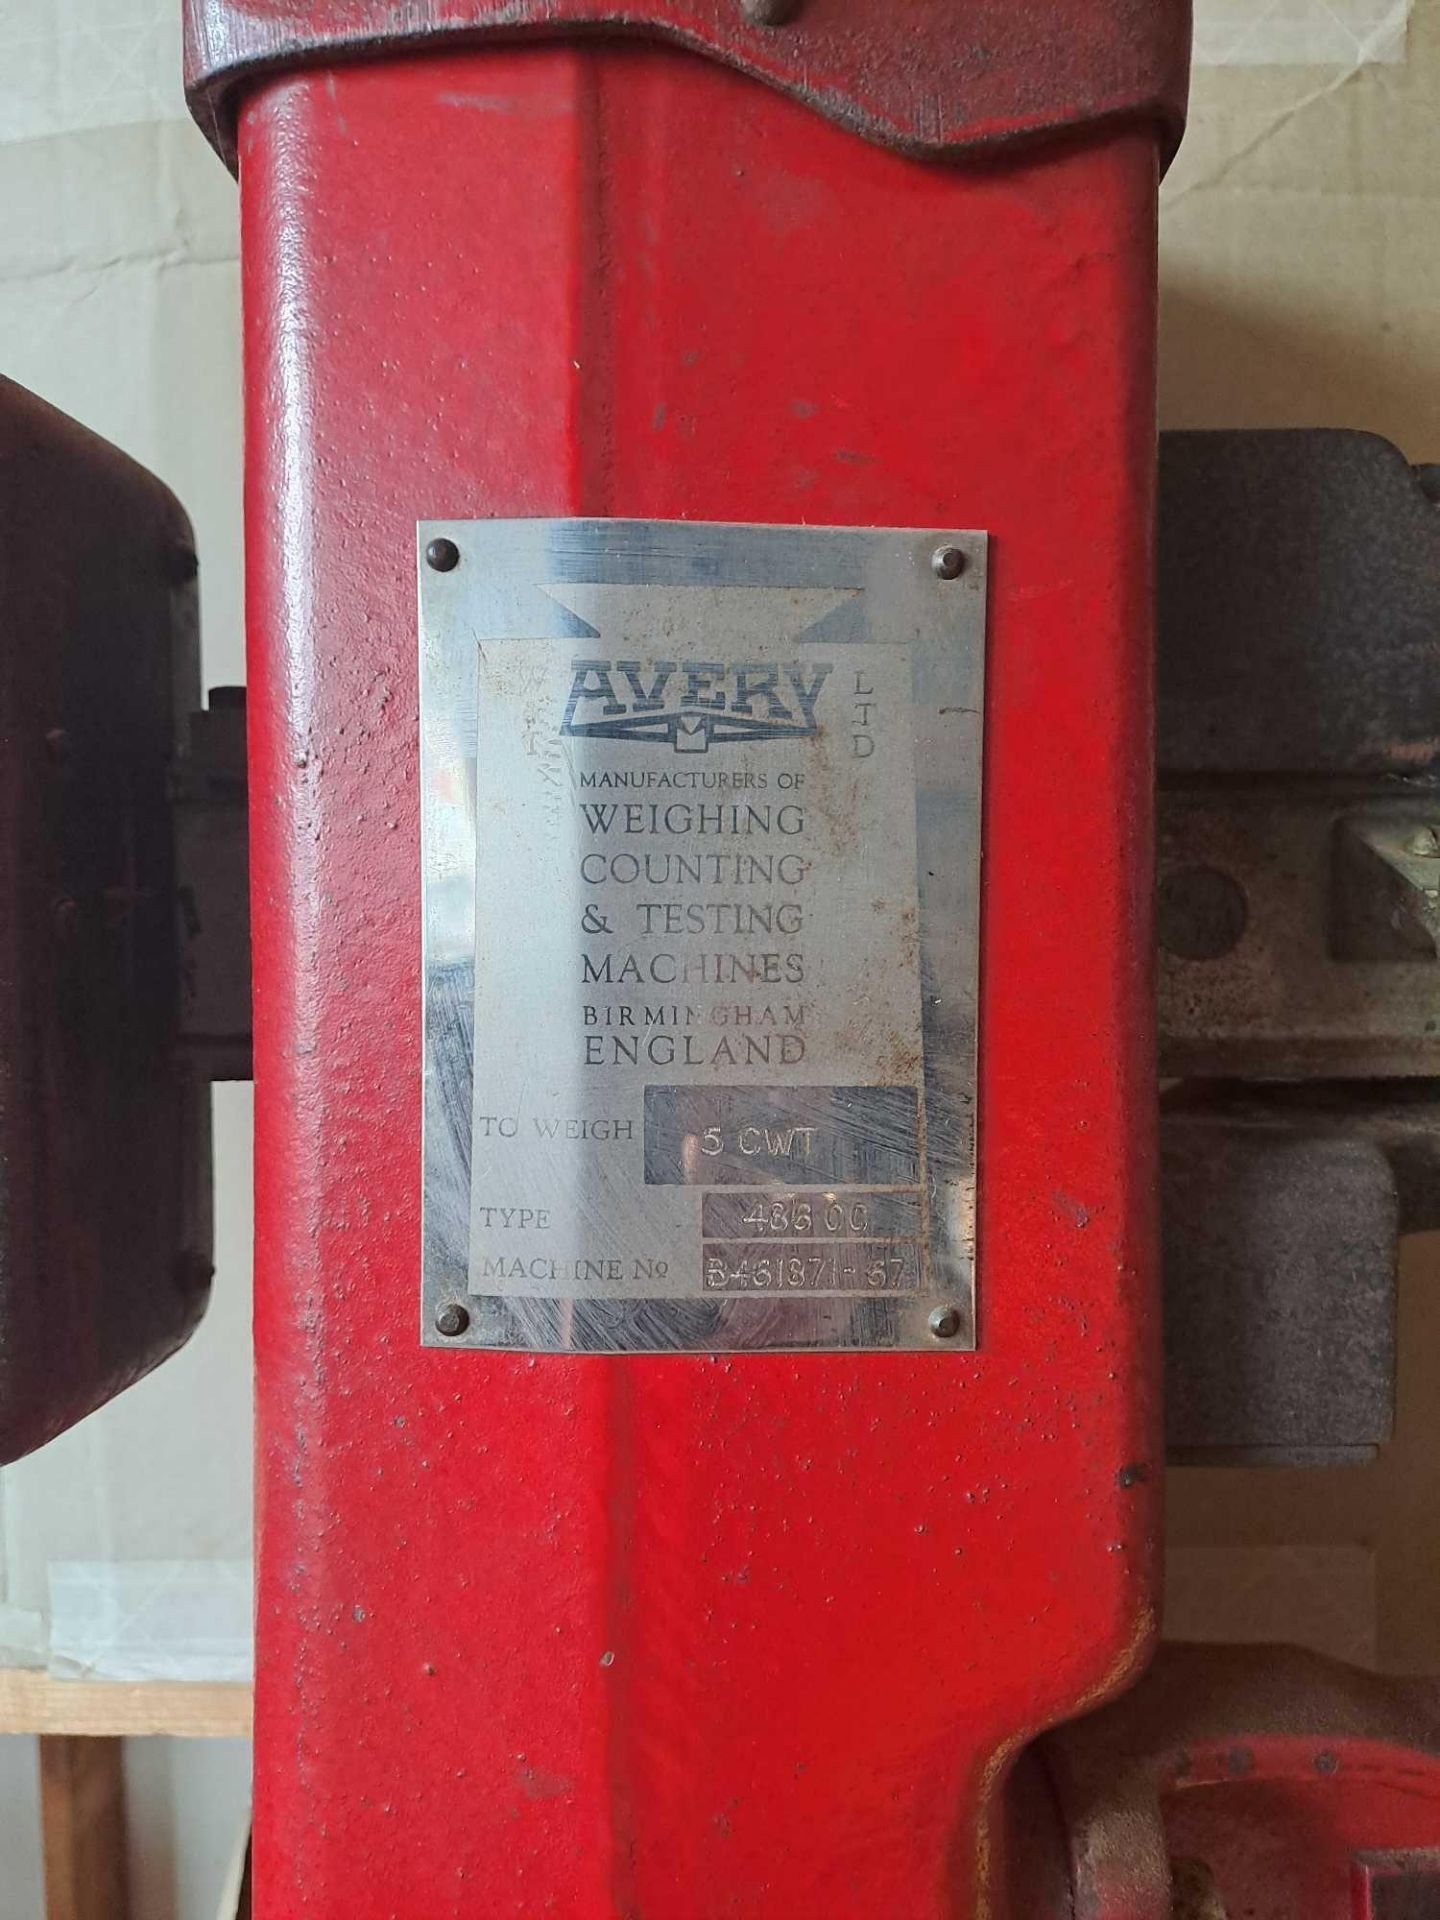 Avery type 486 CC 5 CWT weighing scales - Image 2 of 3